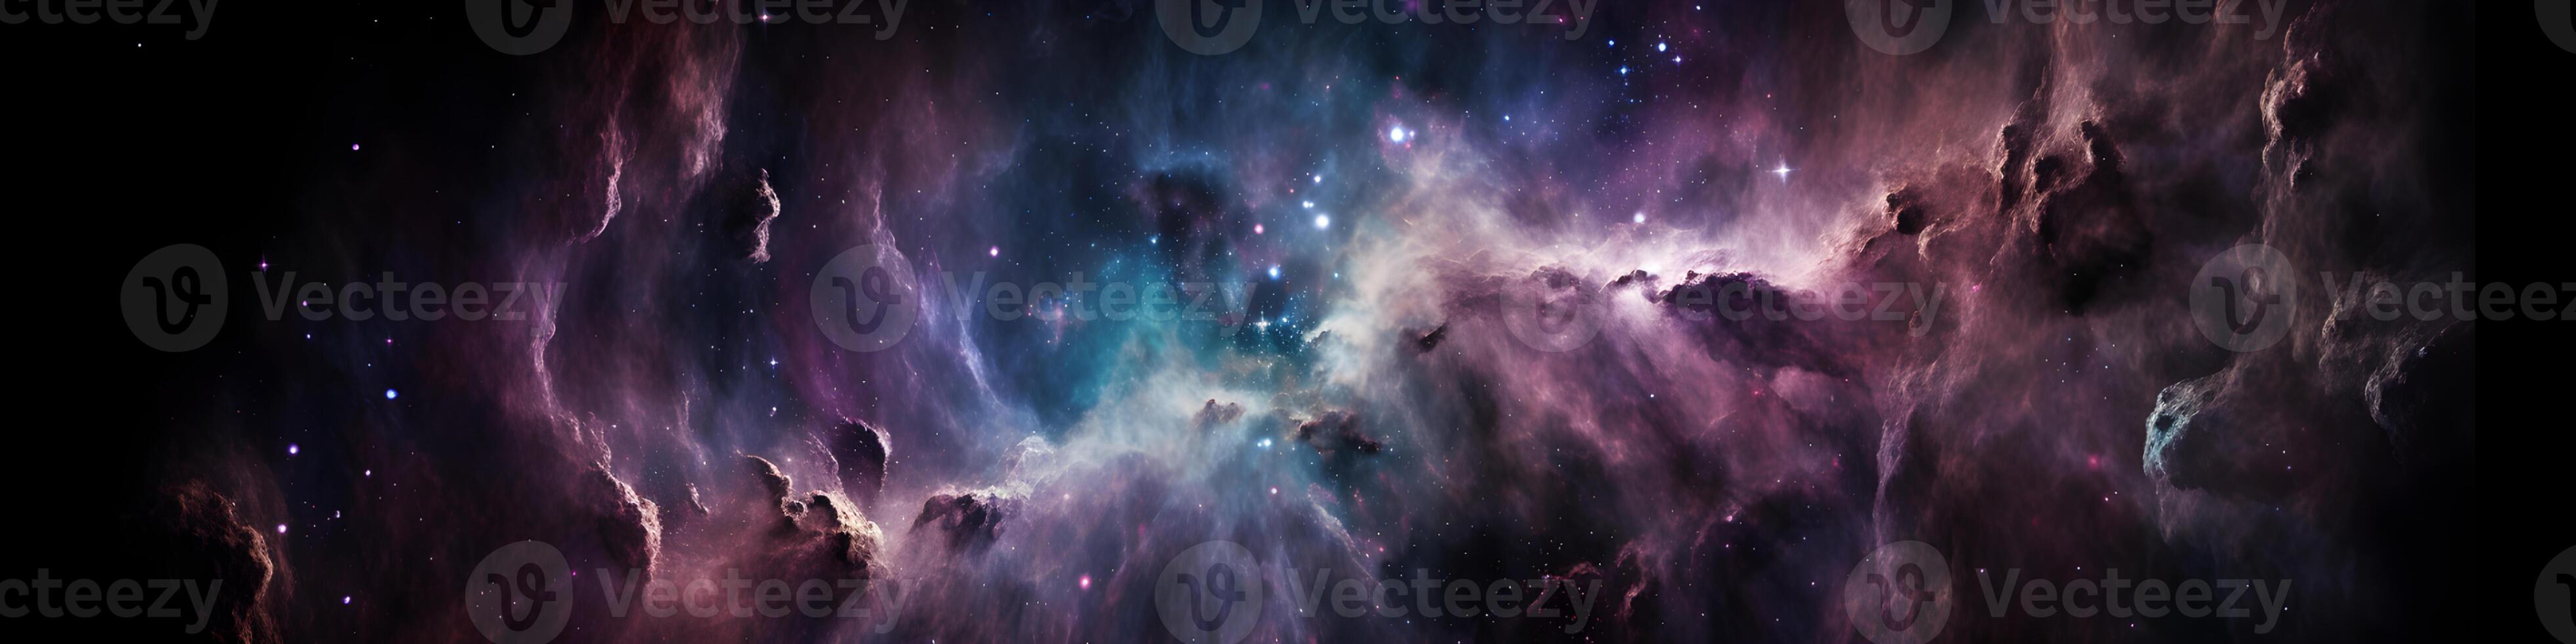 Infinity of space, cosmic nebula stars planets, collision of stars galaxy view photo